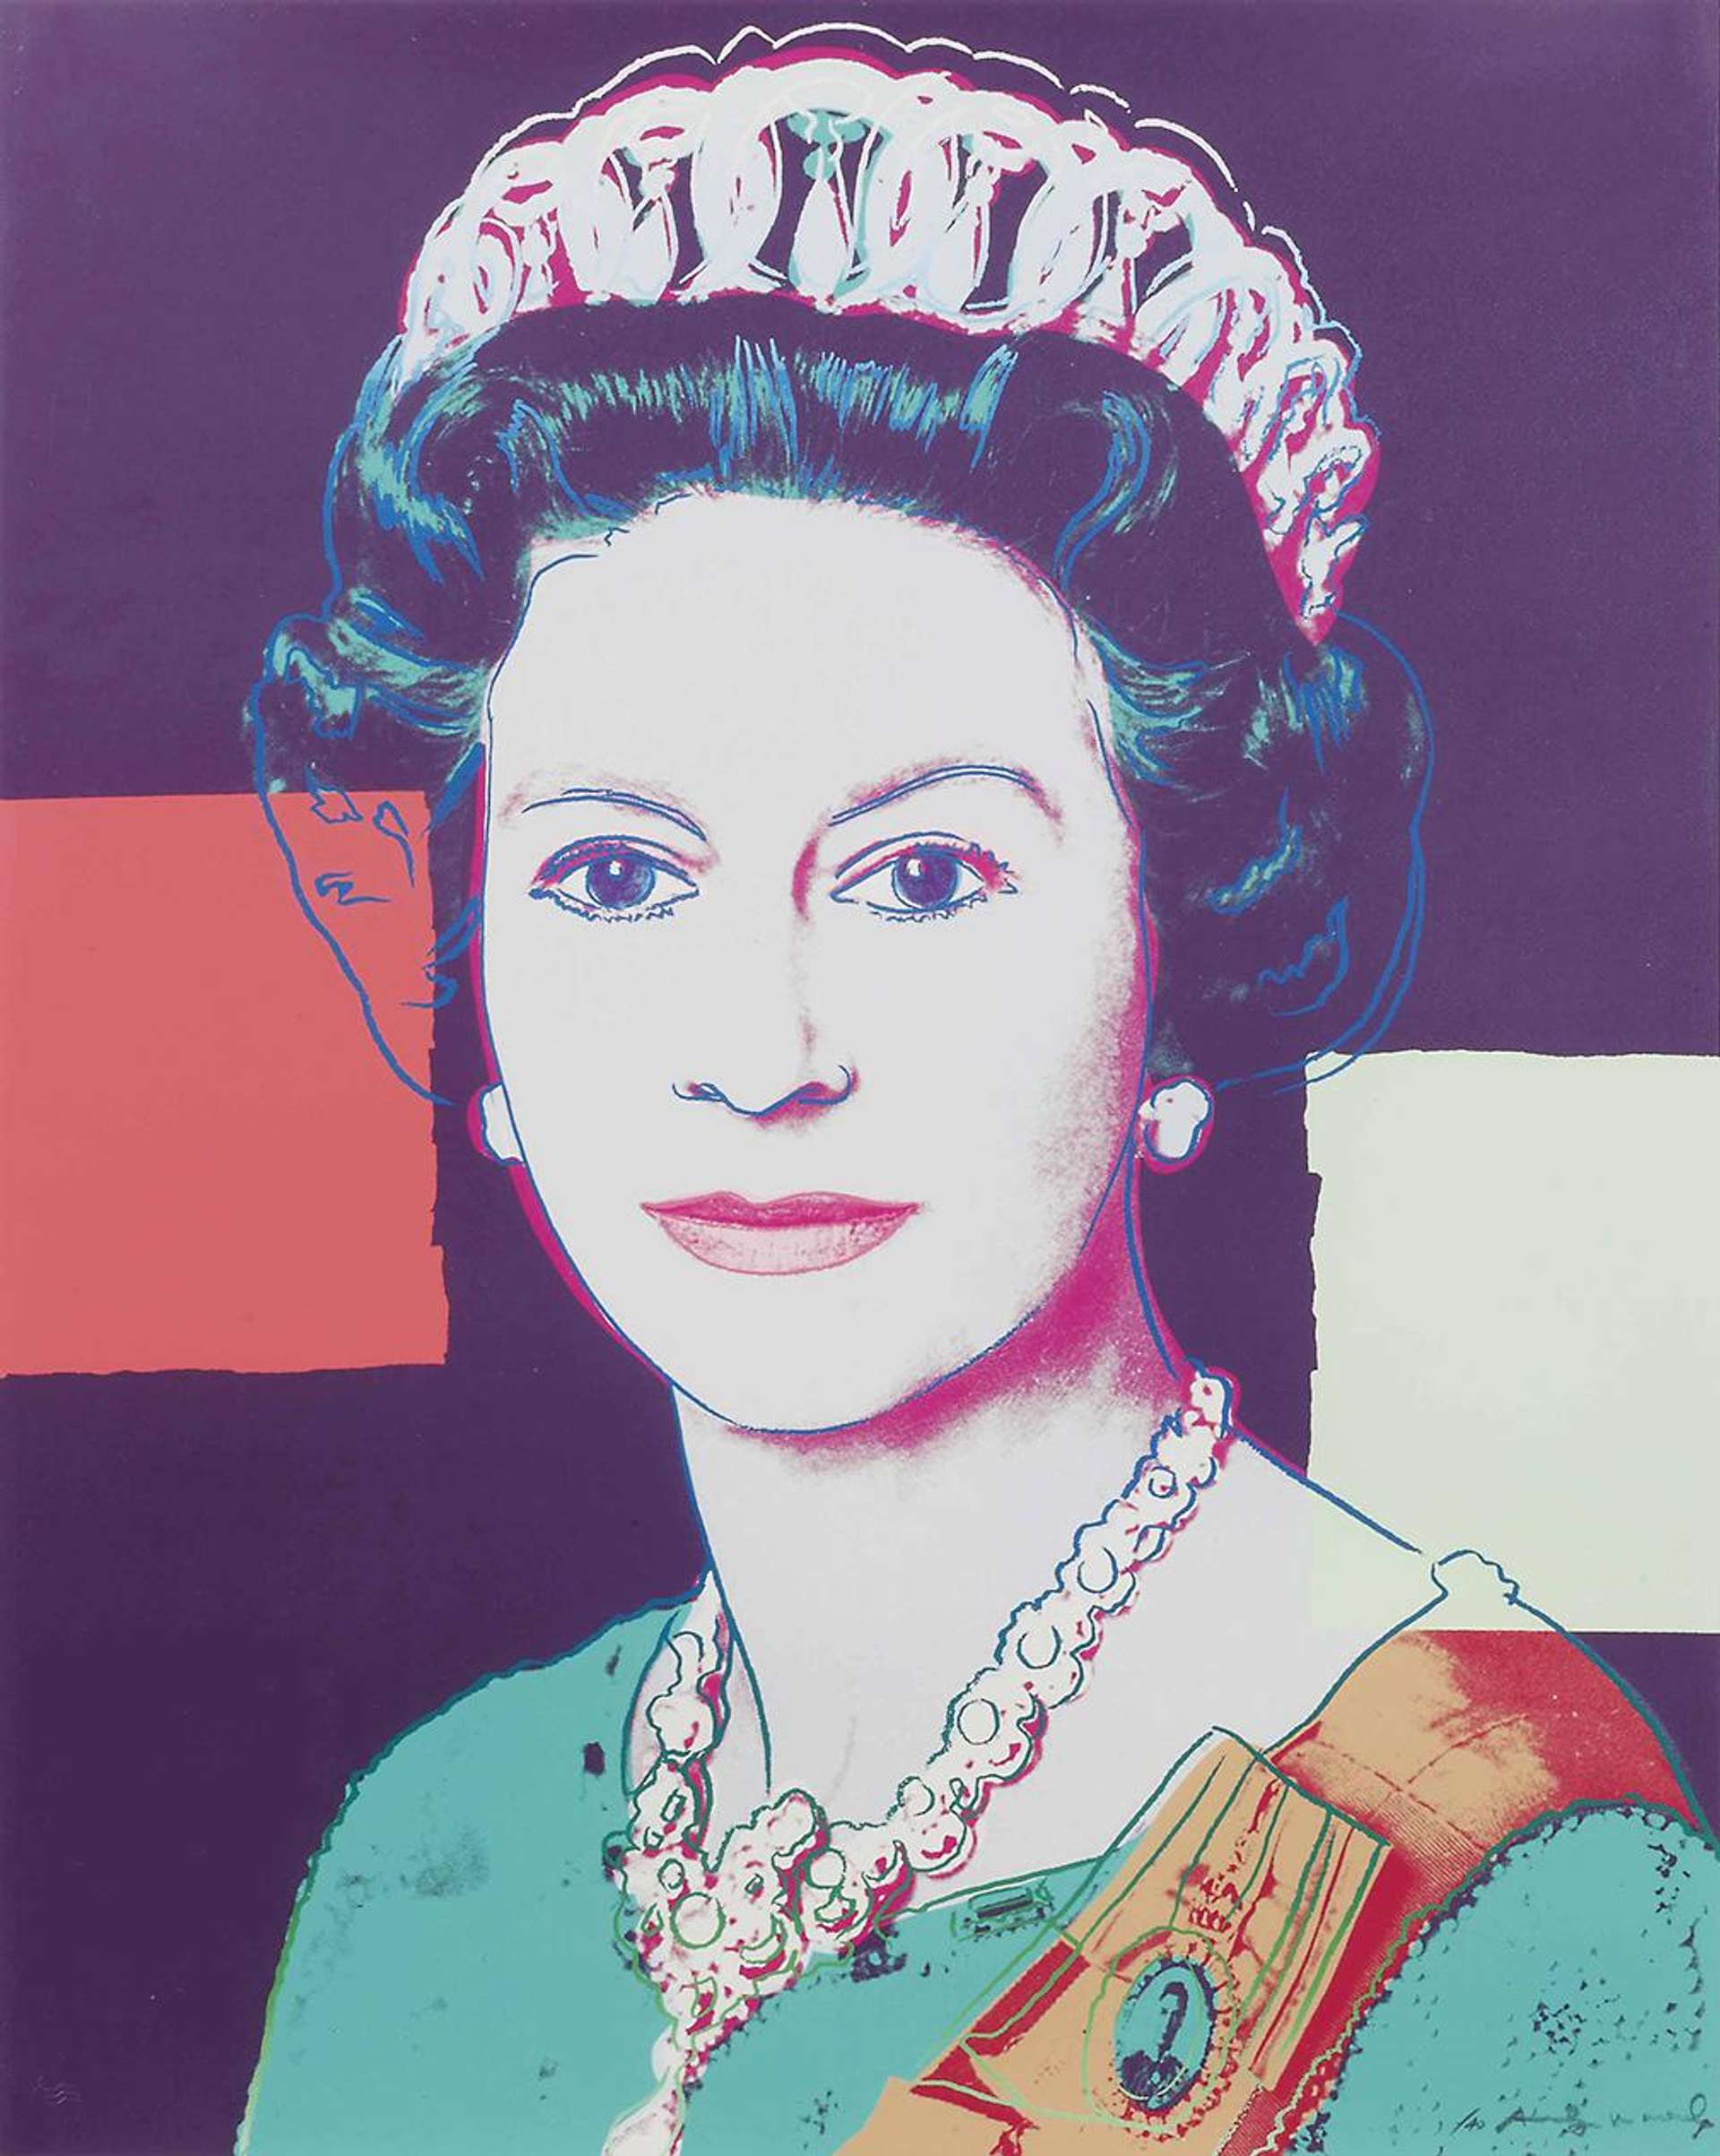 Queen Elizabeth II of the United Kingdom outfitted in royal regalia for her official portrait. Set against an aubergine purple background, with collaged blocks in orange and white reaching towards the Queen's portrait.